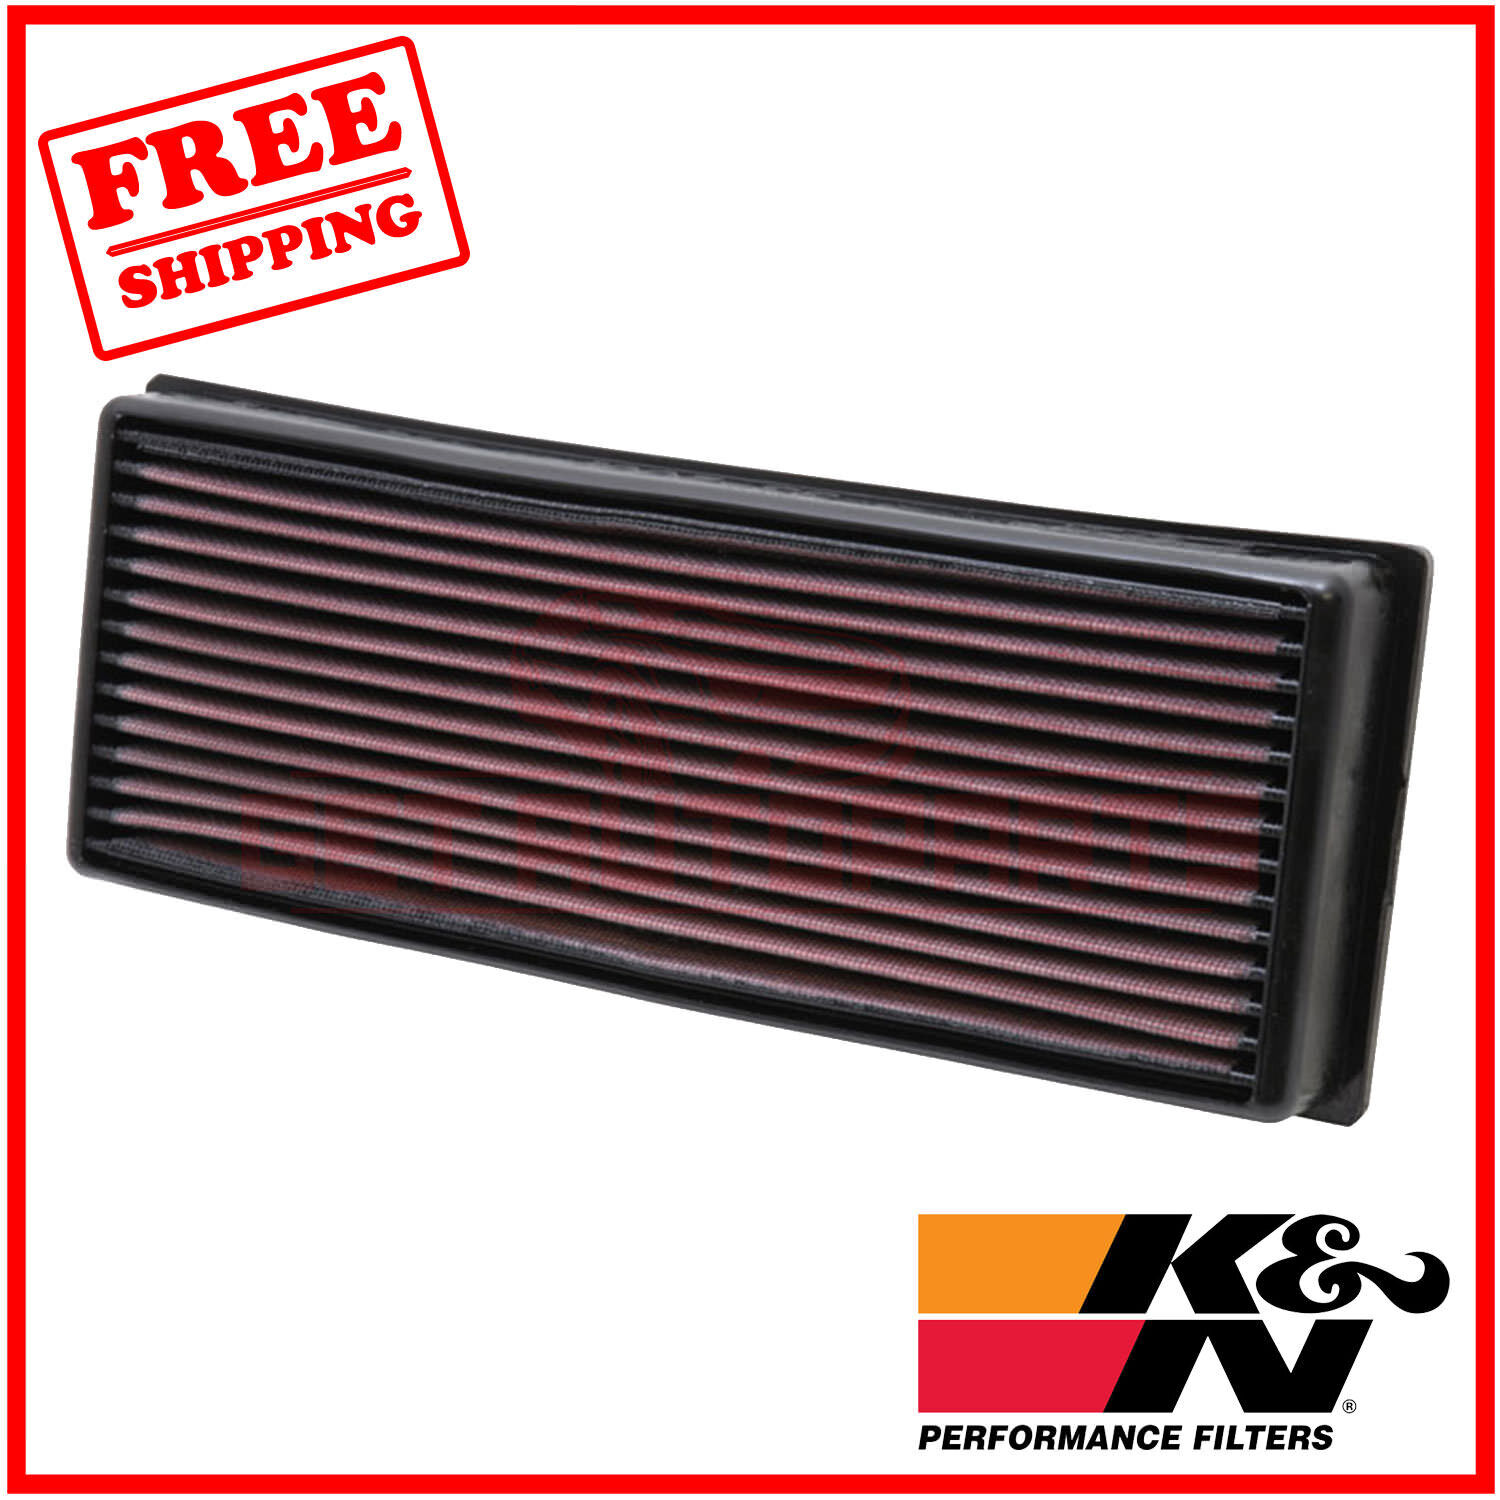 K&N Replacement Air Filter for Volkswagen Scirocco 1975-1976